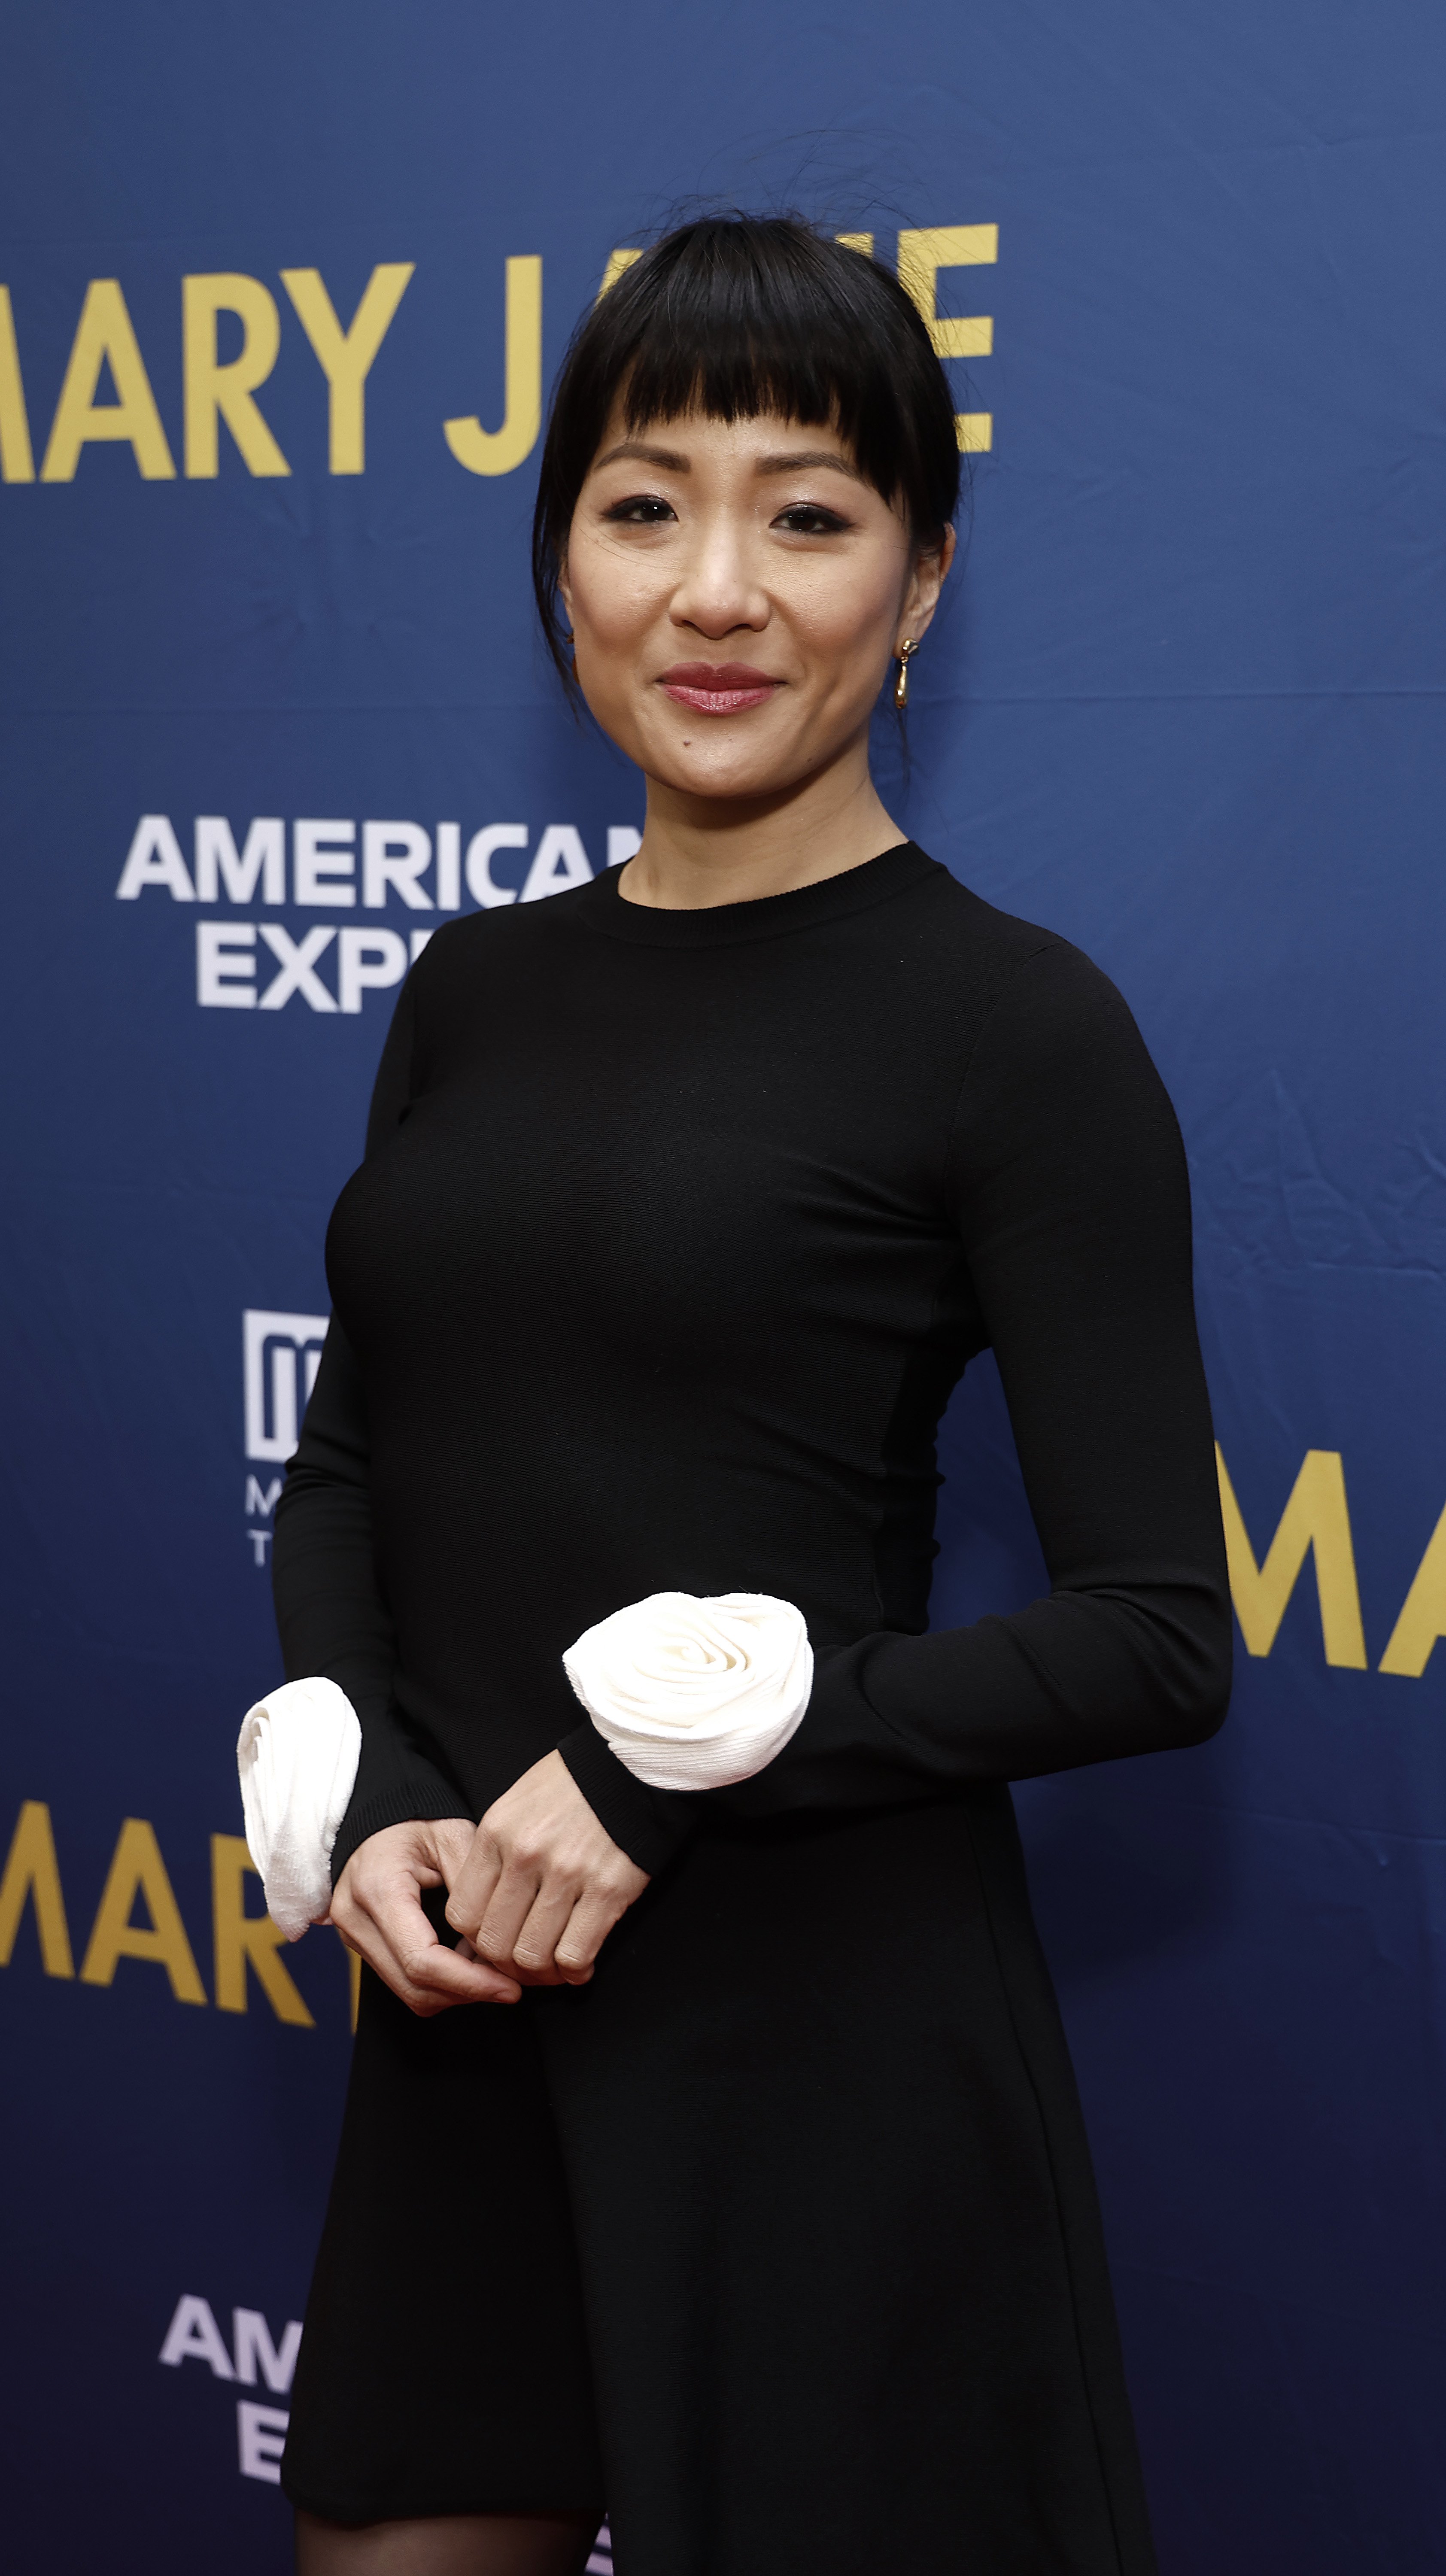 Constance Wu in a chic black dress with distinctive white accents on the sleeves, posing on a red carpet with &quot;Mary Jane&quot; and &quot;American Express&quot; logos in the background